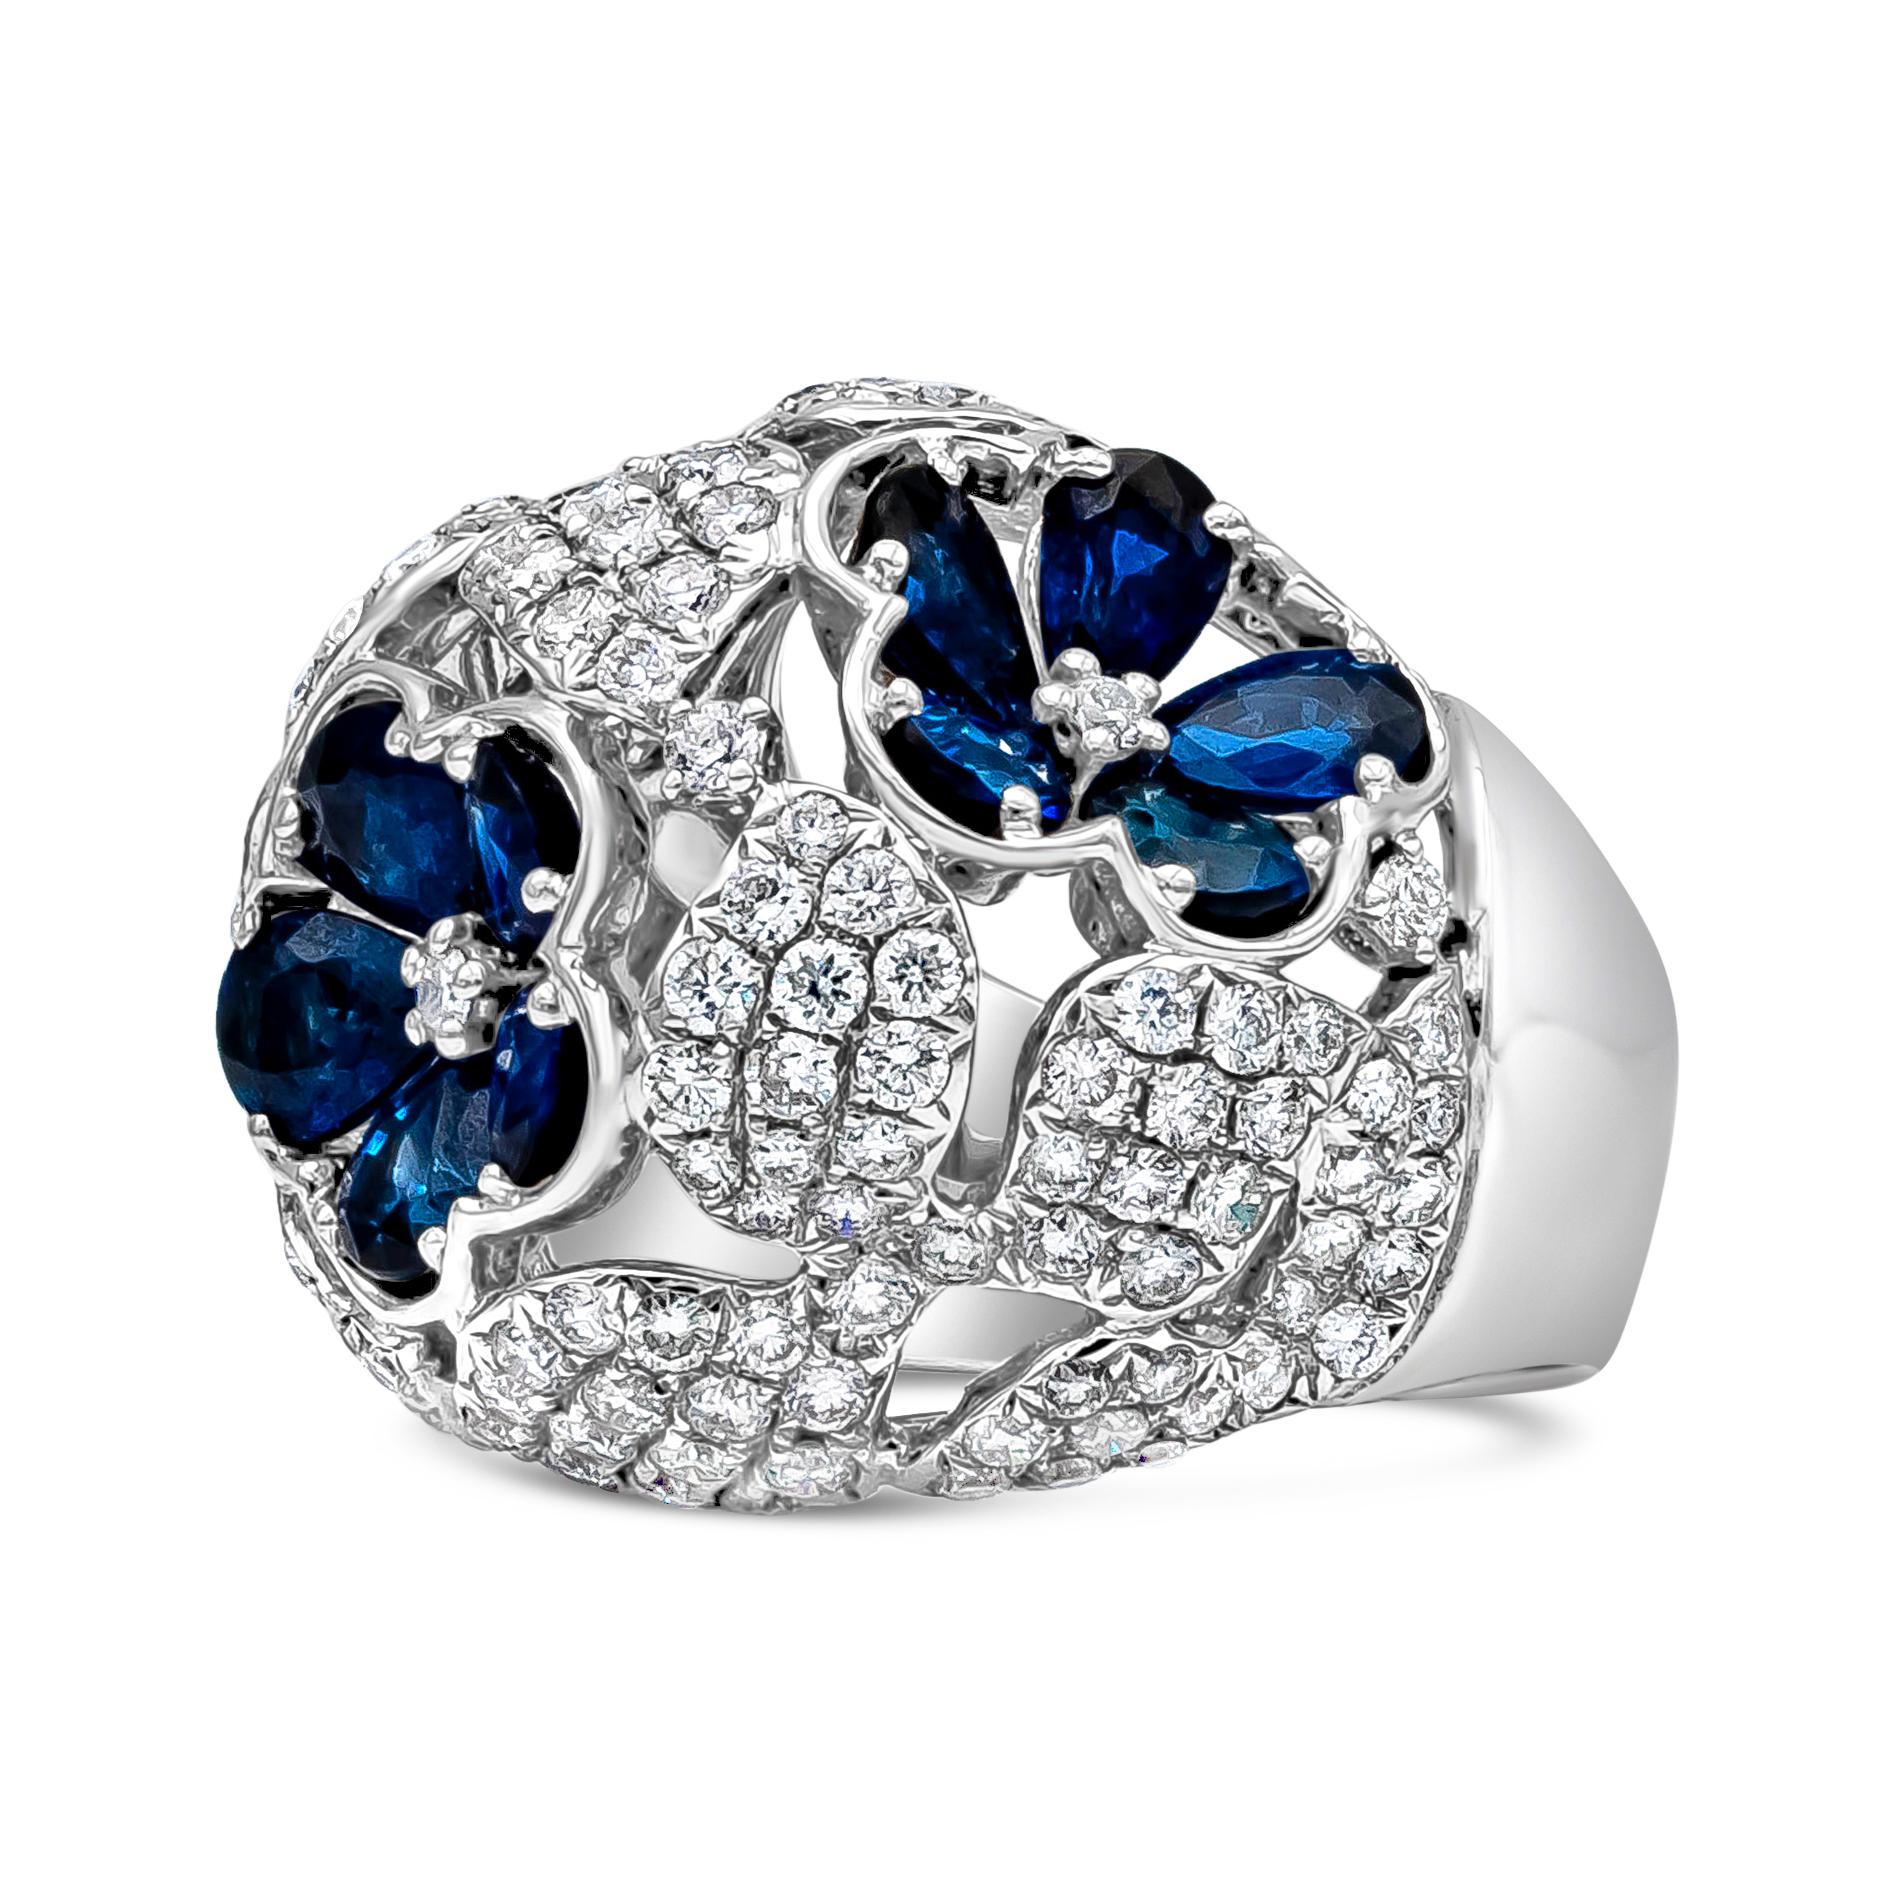 A beautiful and fashionable dome ring showcasing a cluster of blue sapphires set in a flower-motif design, accented by round brilliant diamonds micro-pave set in a four leaf clover design. Blue sapphires weigh 5.02 carats total, diamonds weigh 3.09